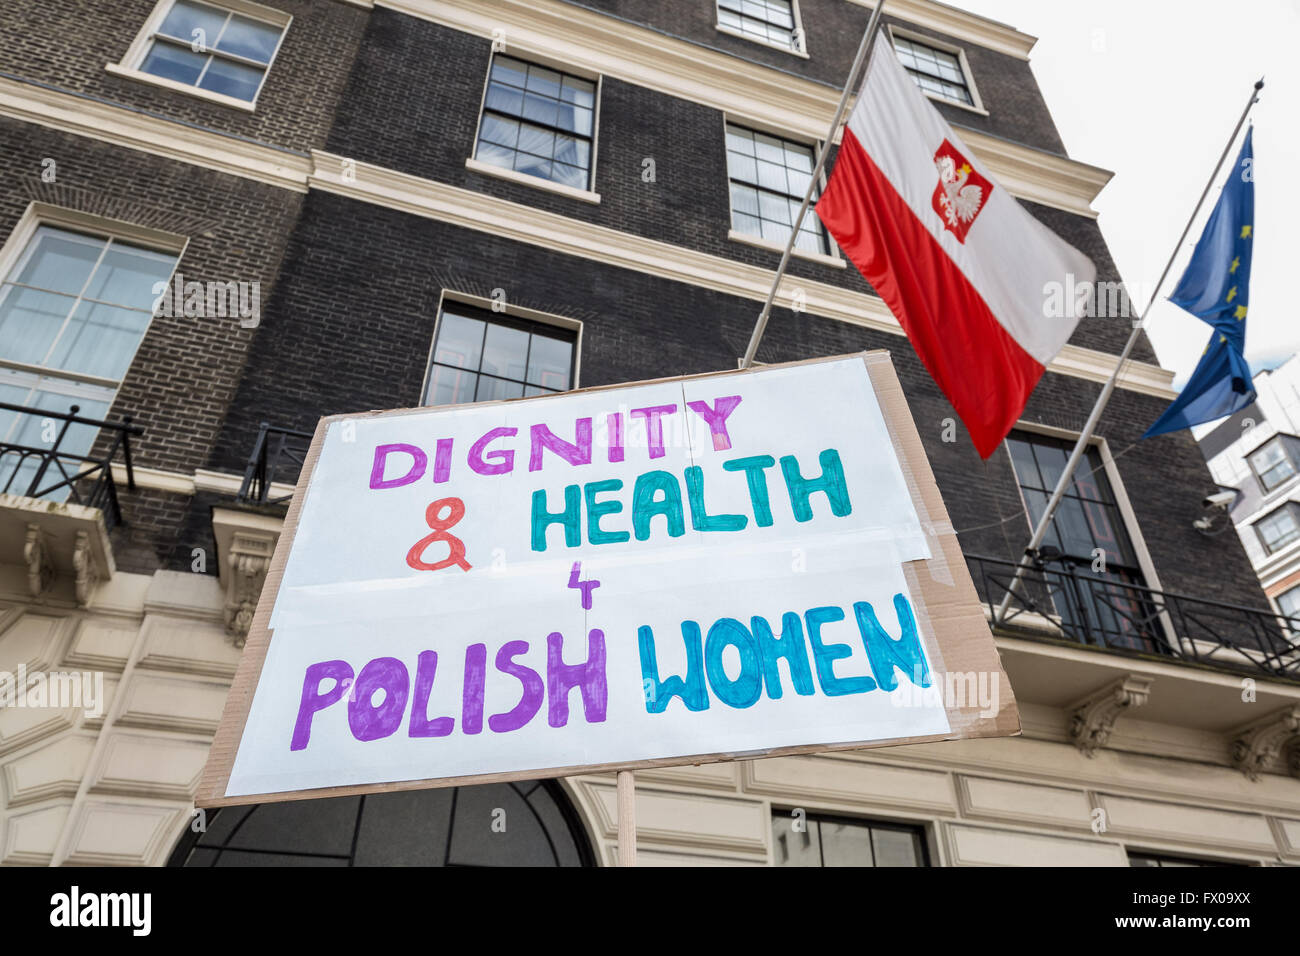 London, UK. 9th April, 2016. Protest outside Polish Embassy in London ‘Nie dla torturowania kobiet w Polsce’ (No to torturing women in Poland) against proposed legislation that will tighten the already strict anti-abortion regulations in Poland Credit:  Guy Corbishley/Alamy Live News Stock Photo